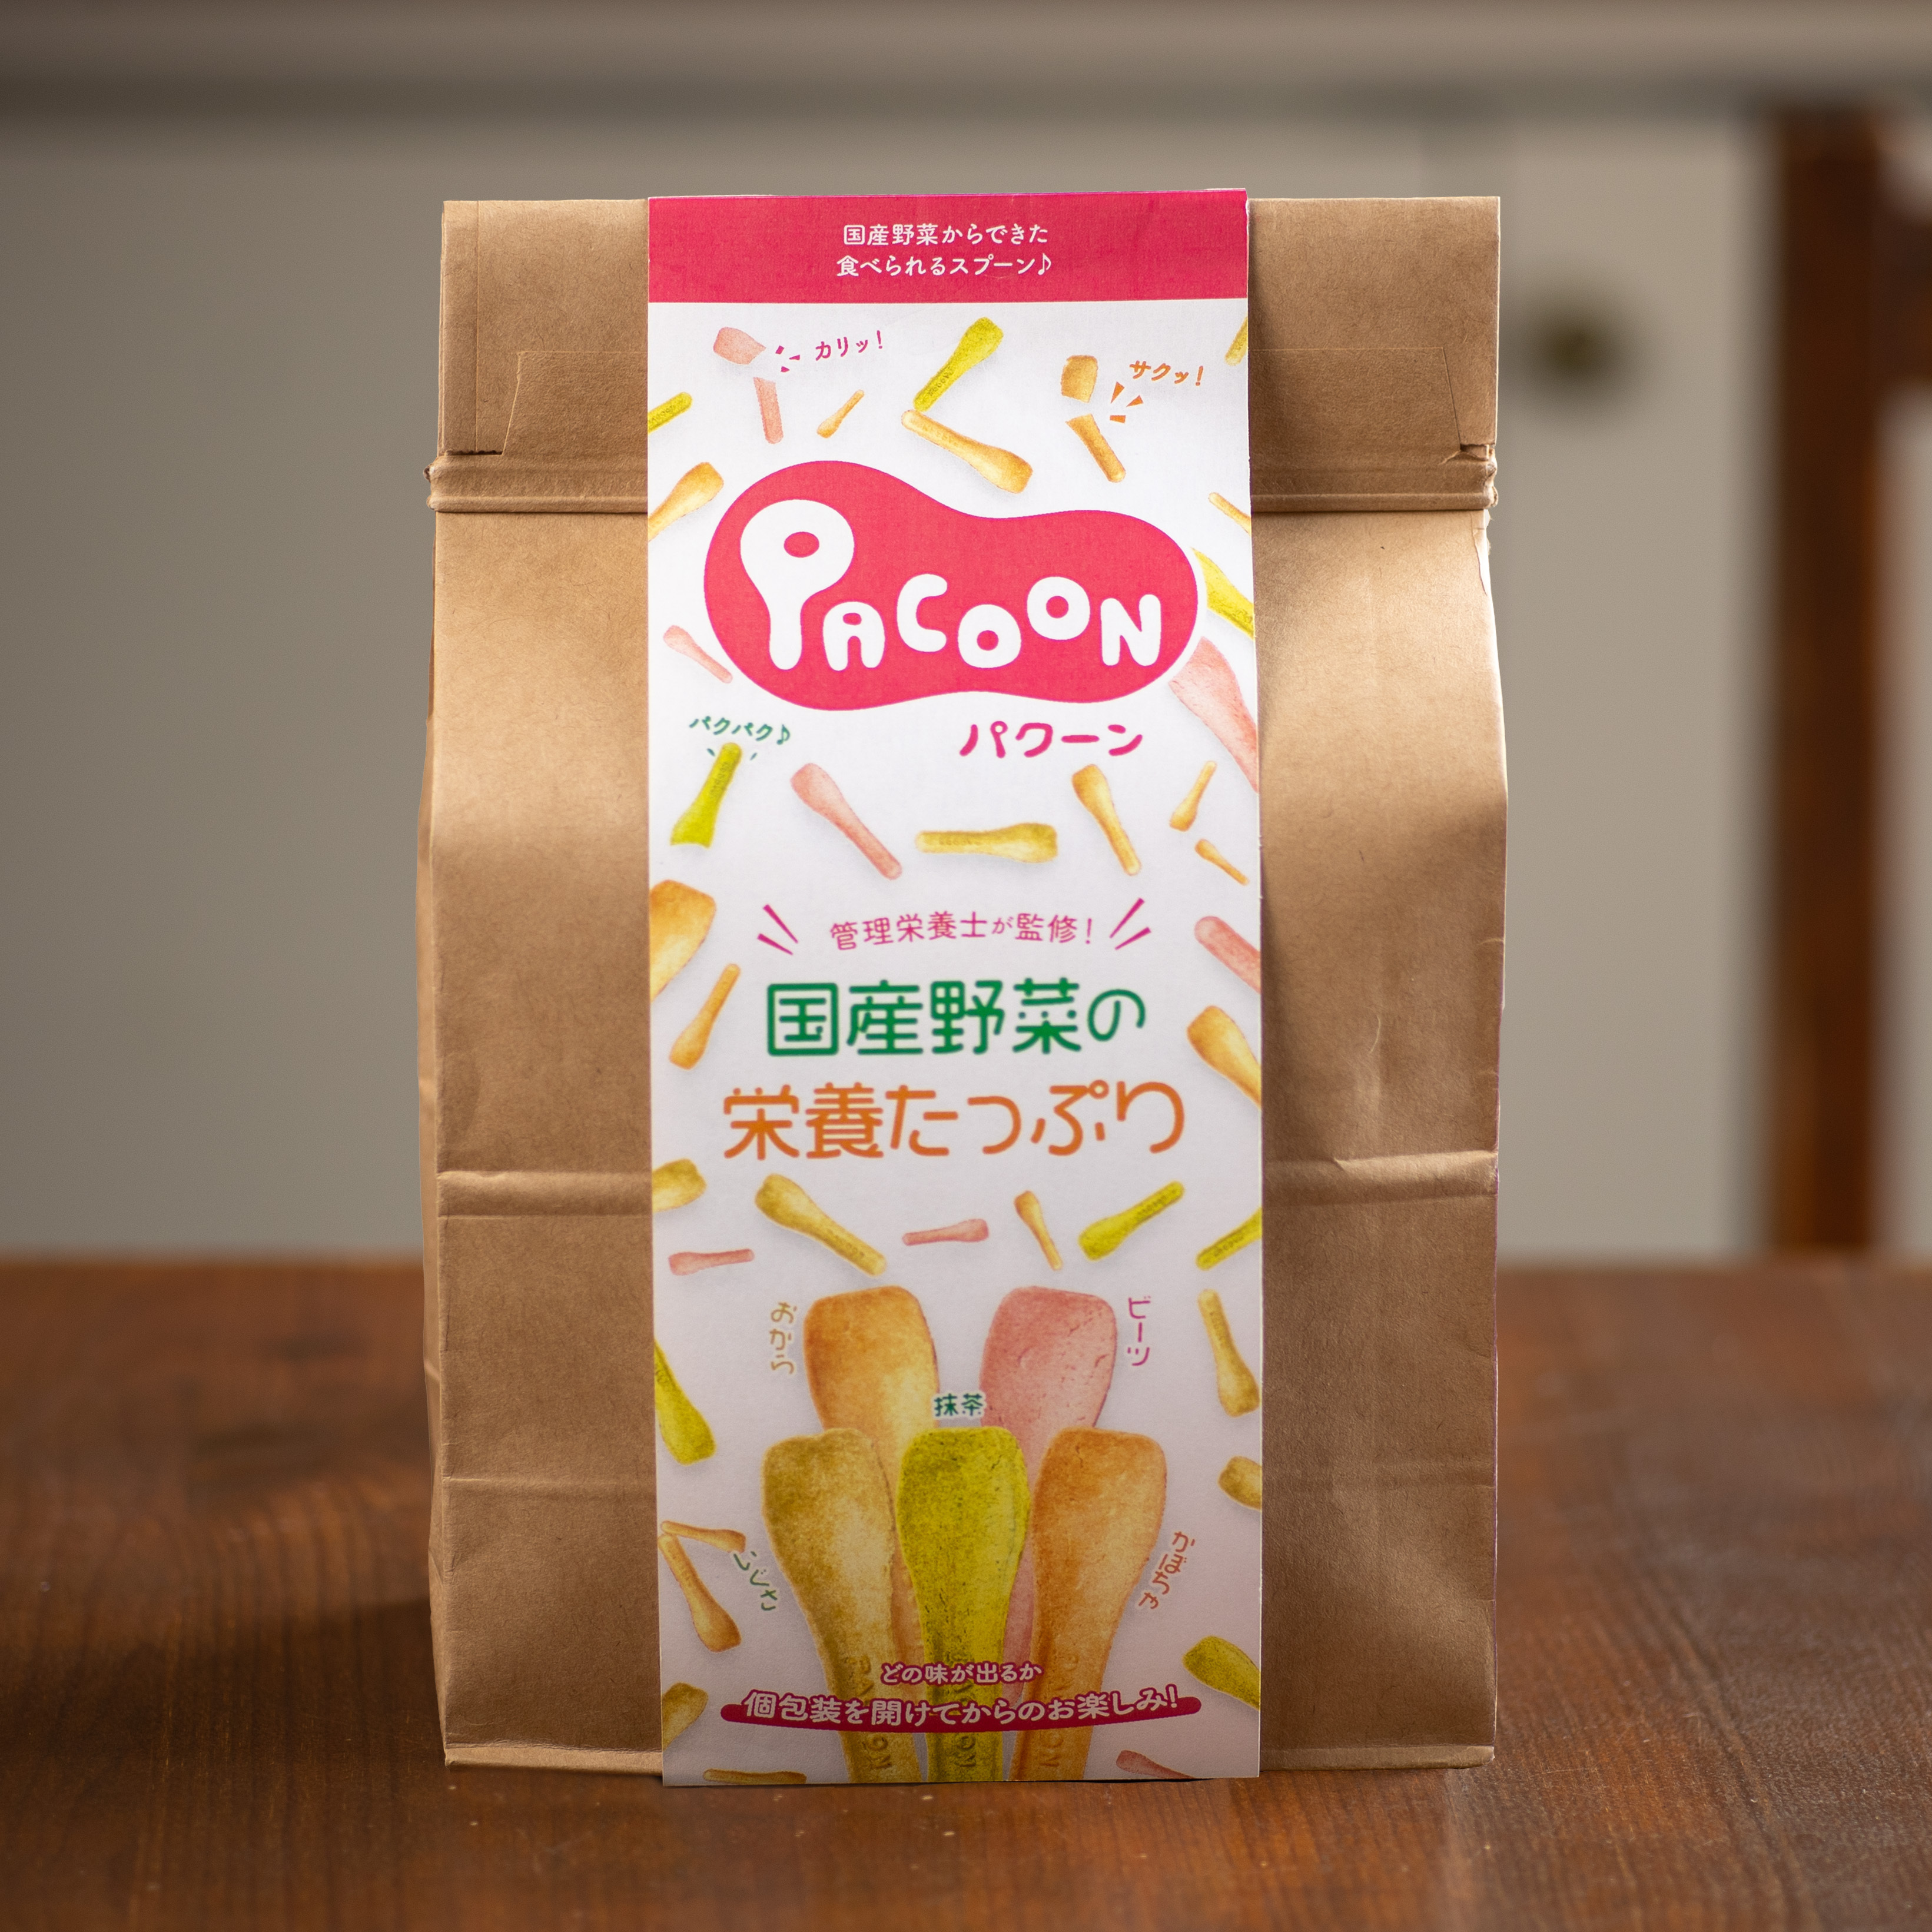 Pacoon 5種ミックス 50本入 Pacoon パクーン 国産野菜でできた食べられるスプーン